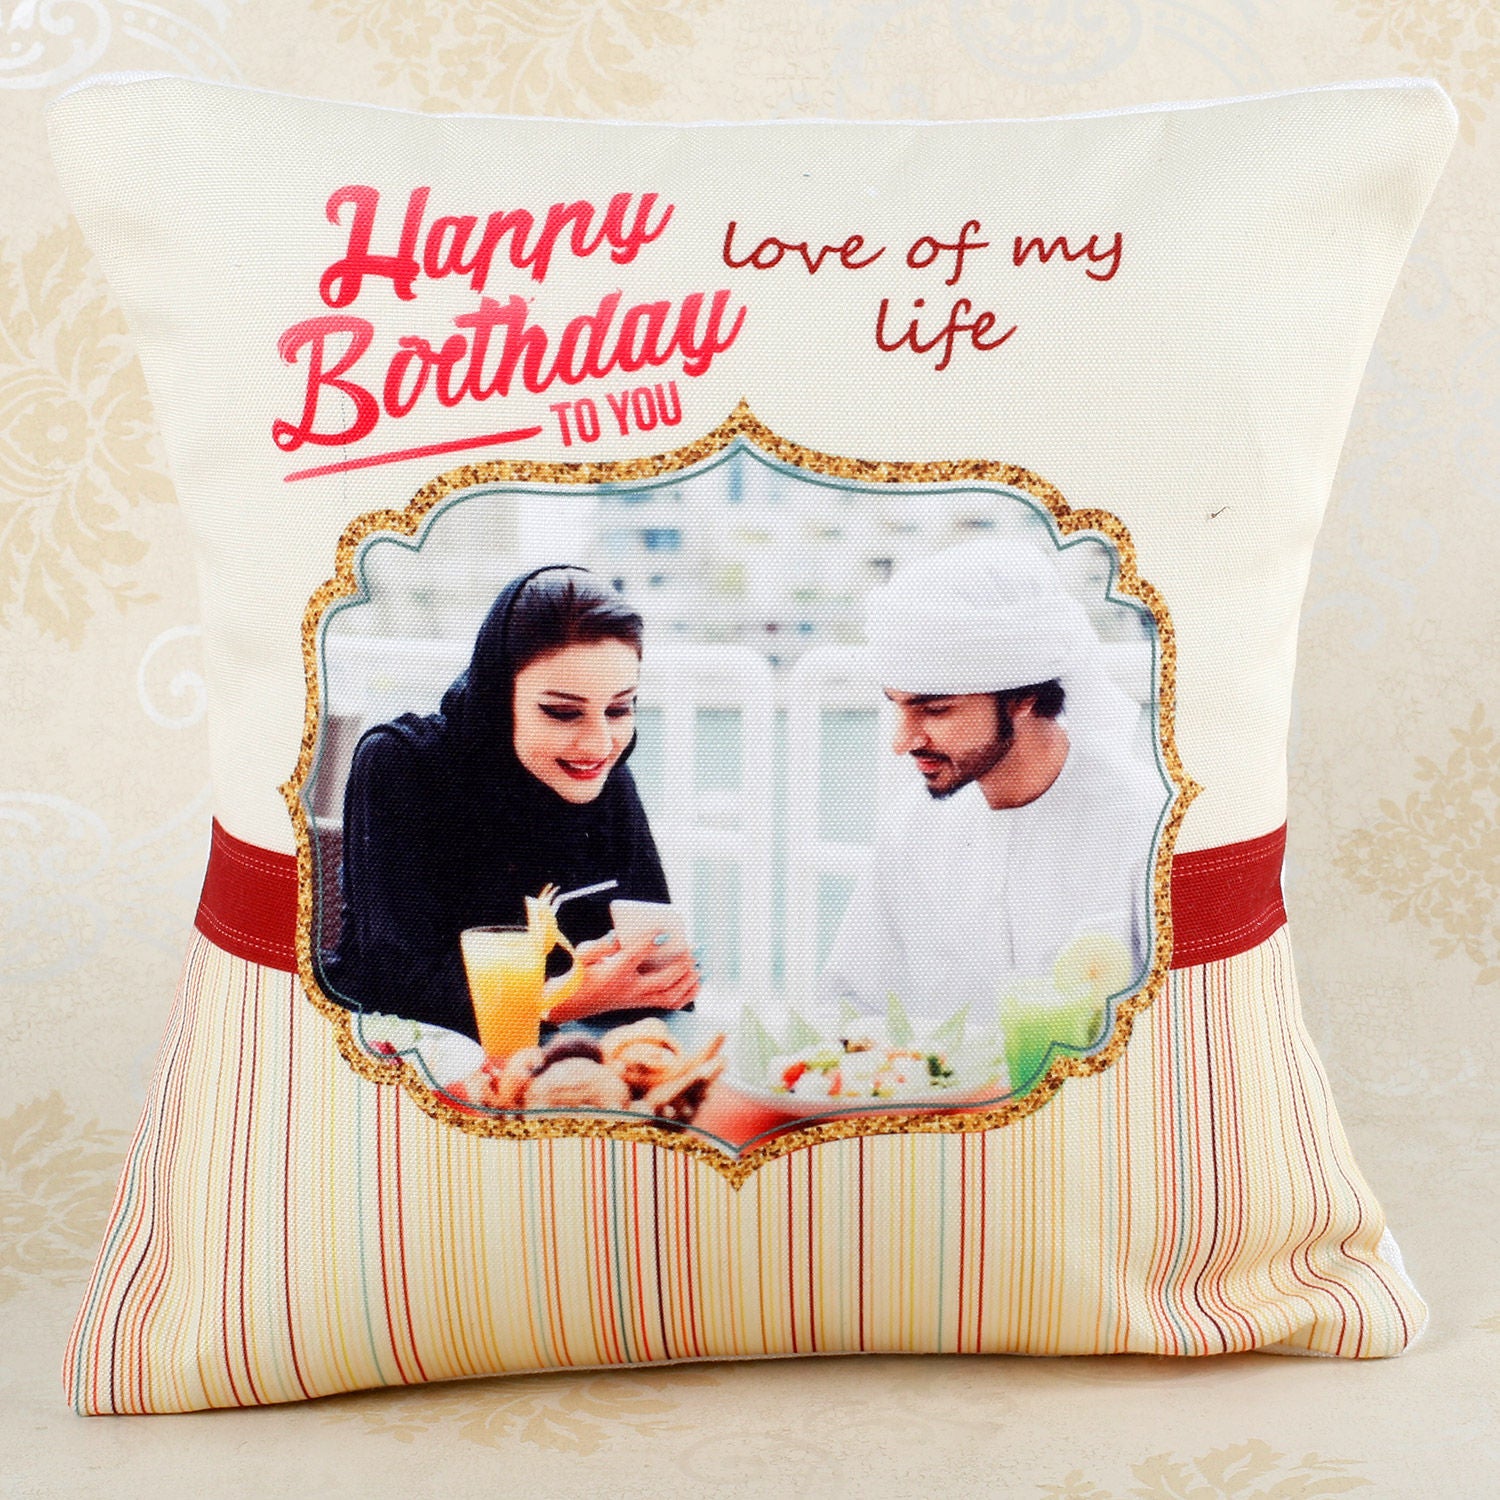 Cushions Online  Buy Cushions Gift With Images @ FNP